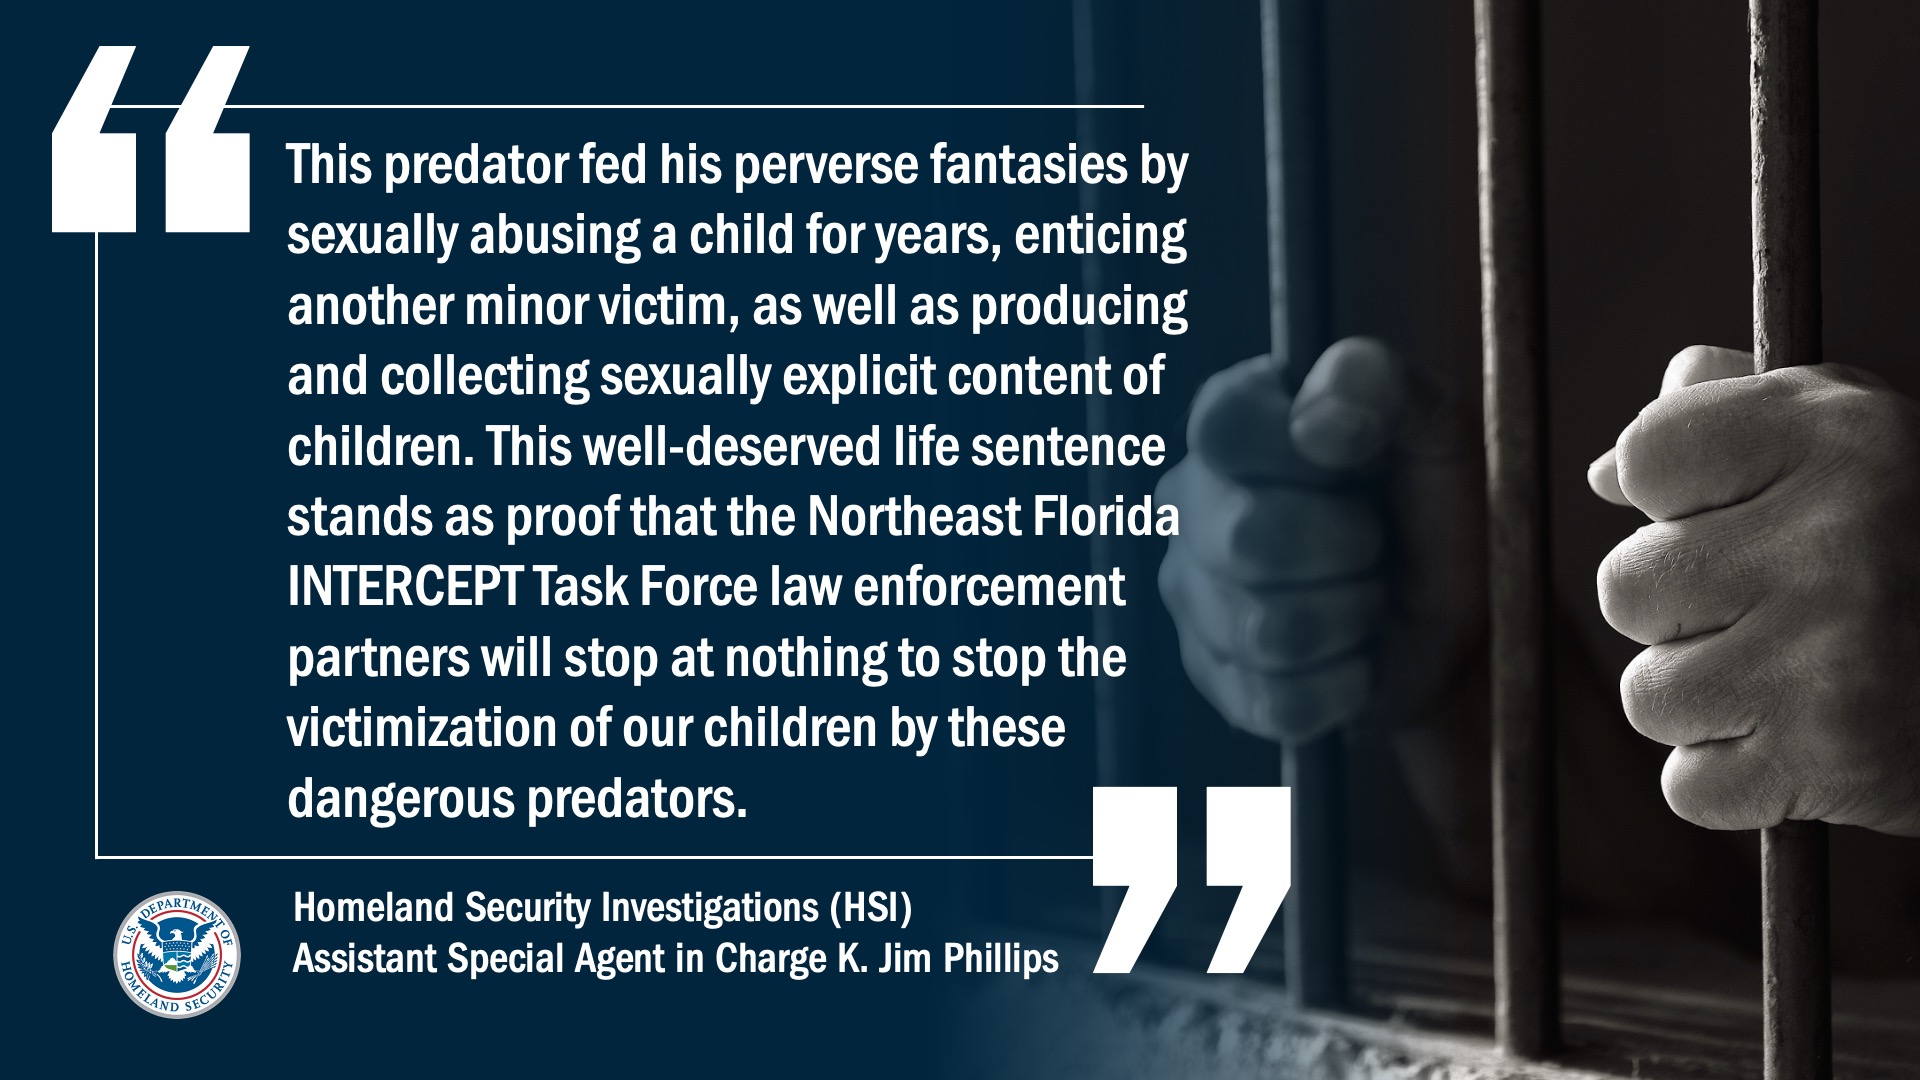 “This predator fed his perverse fantasies by sexually abusing a child for years, enticing another minor victim, as well as producing and collecting sexually explicit content of children[...]” HSI Assistant SAC Phillips